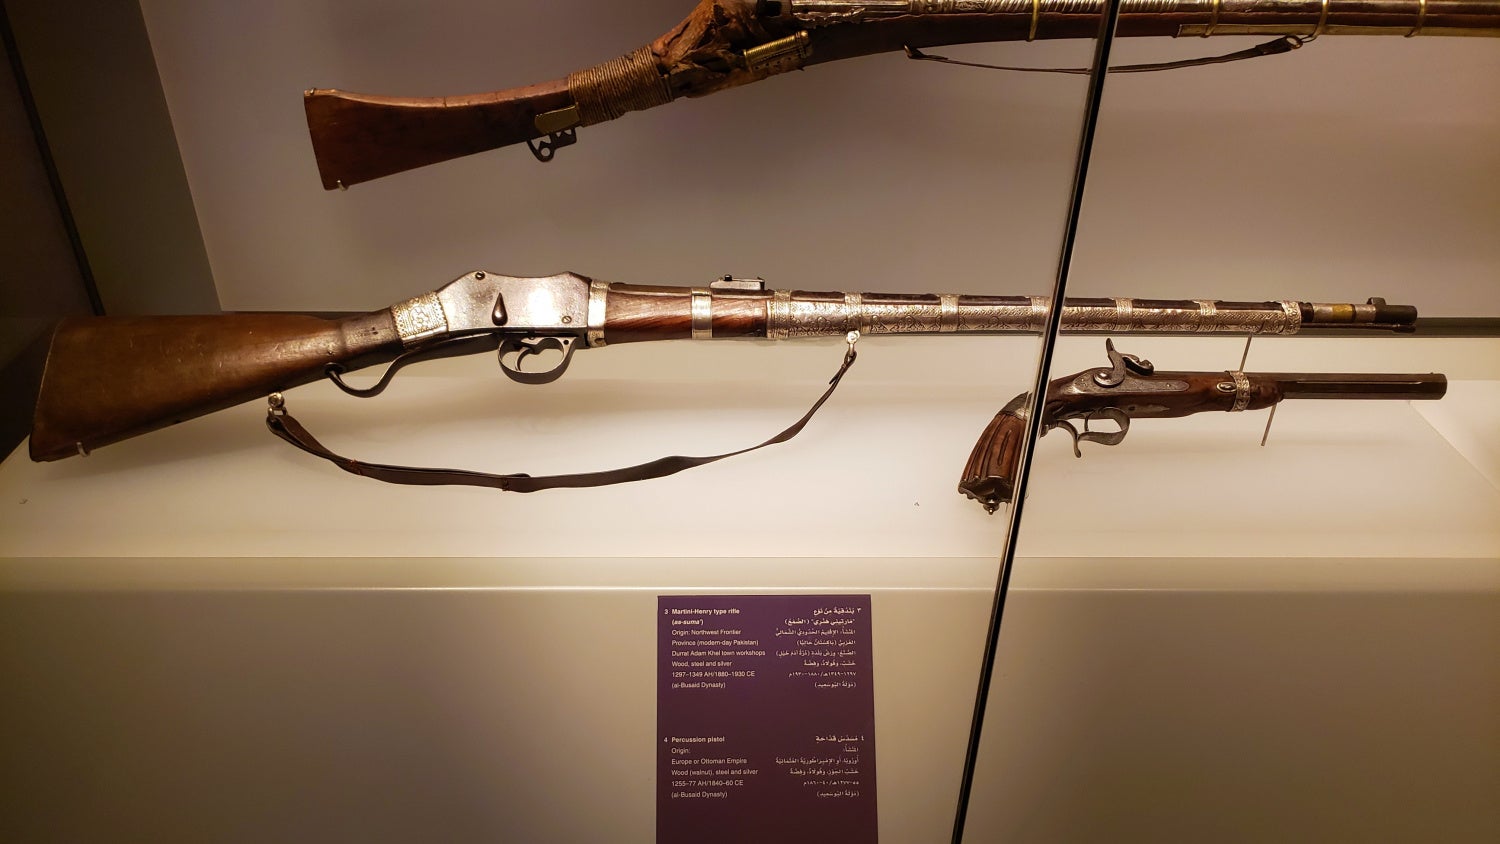 Martini-Henry rifle from the National History Museum of Oman